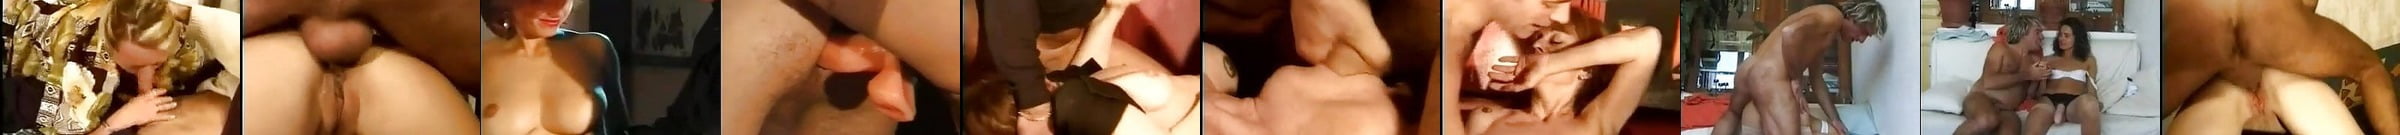 Featured Extreme Anal Toys Porn Videos 4 Xhamster